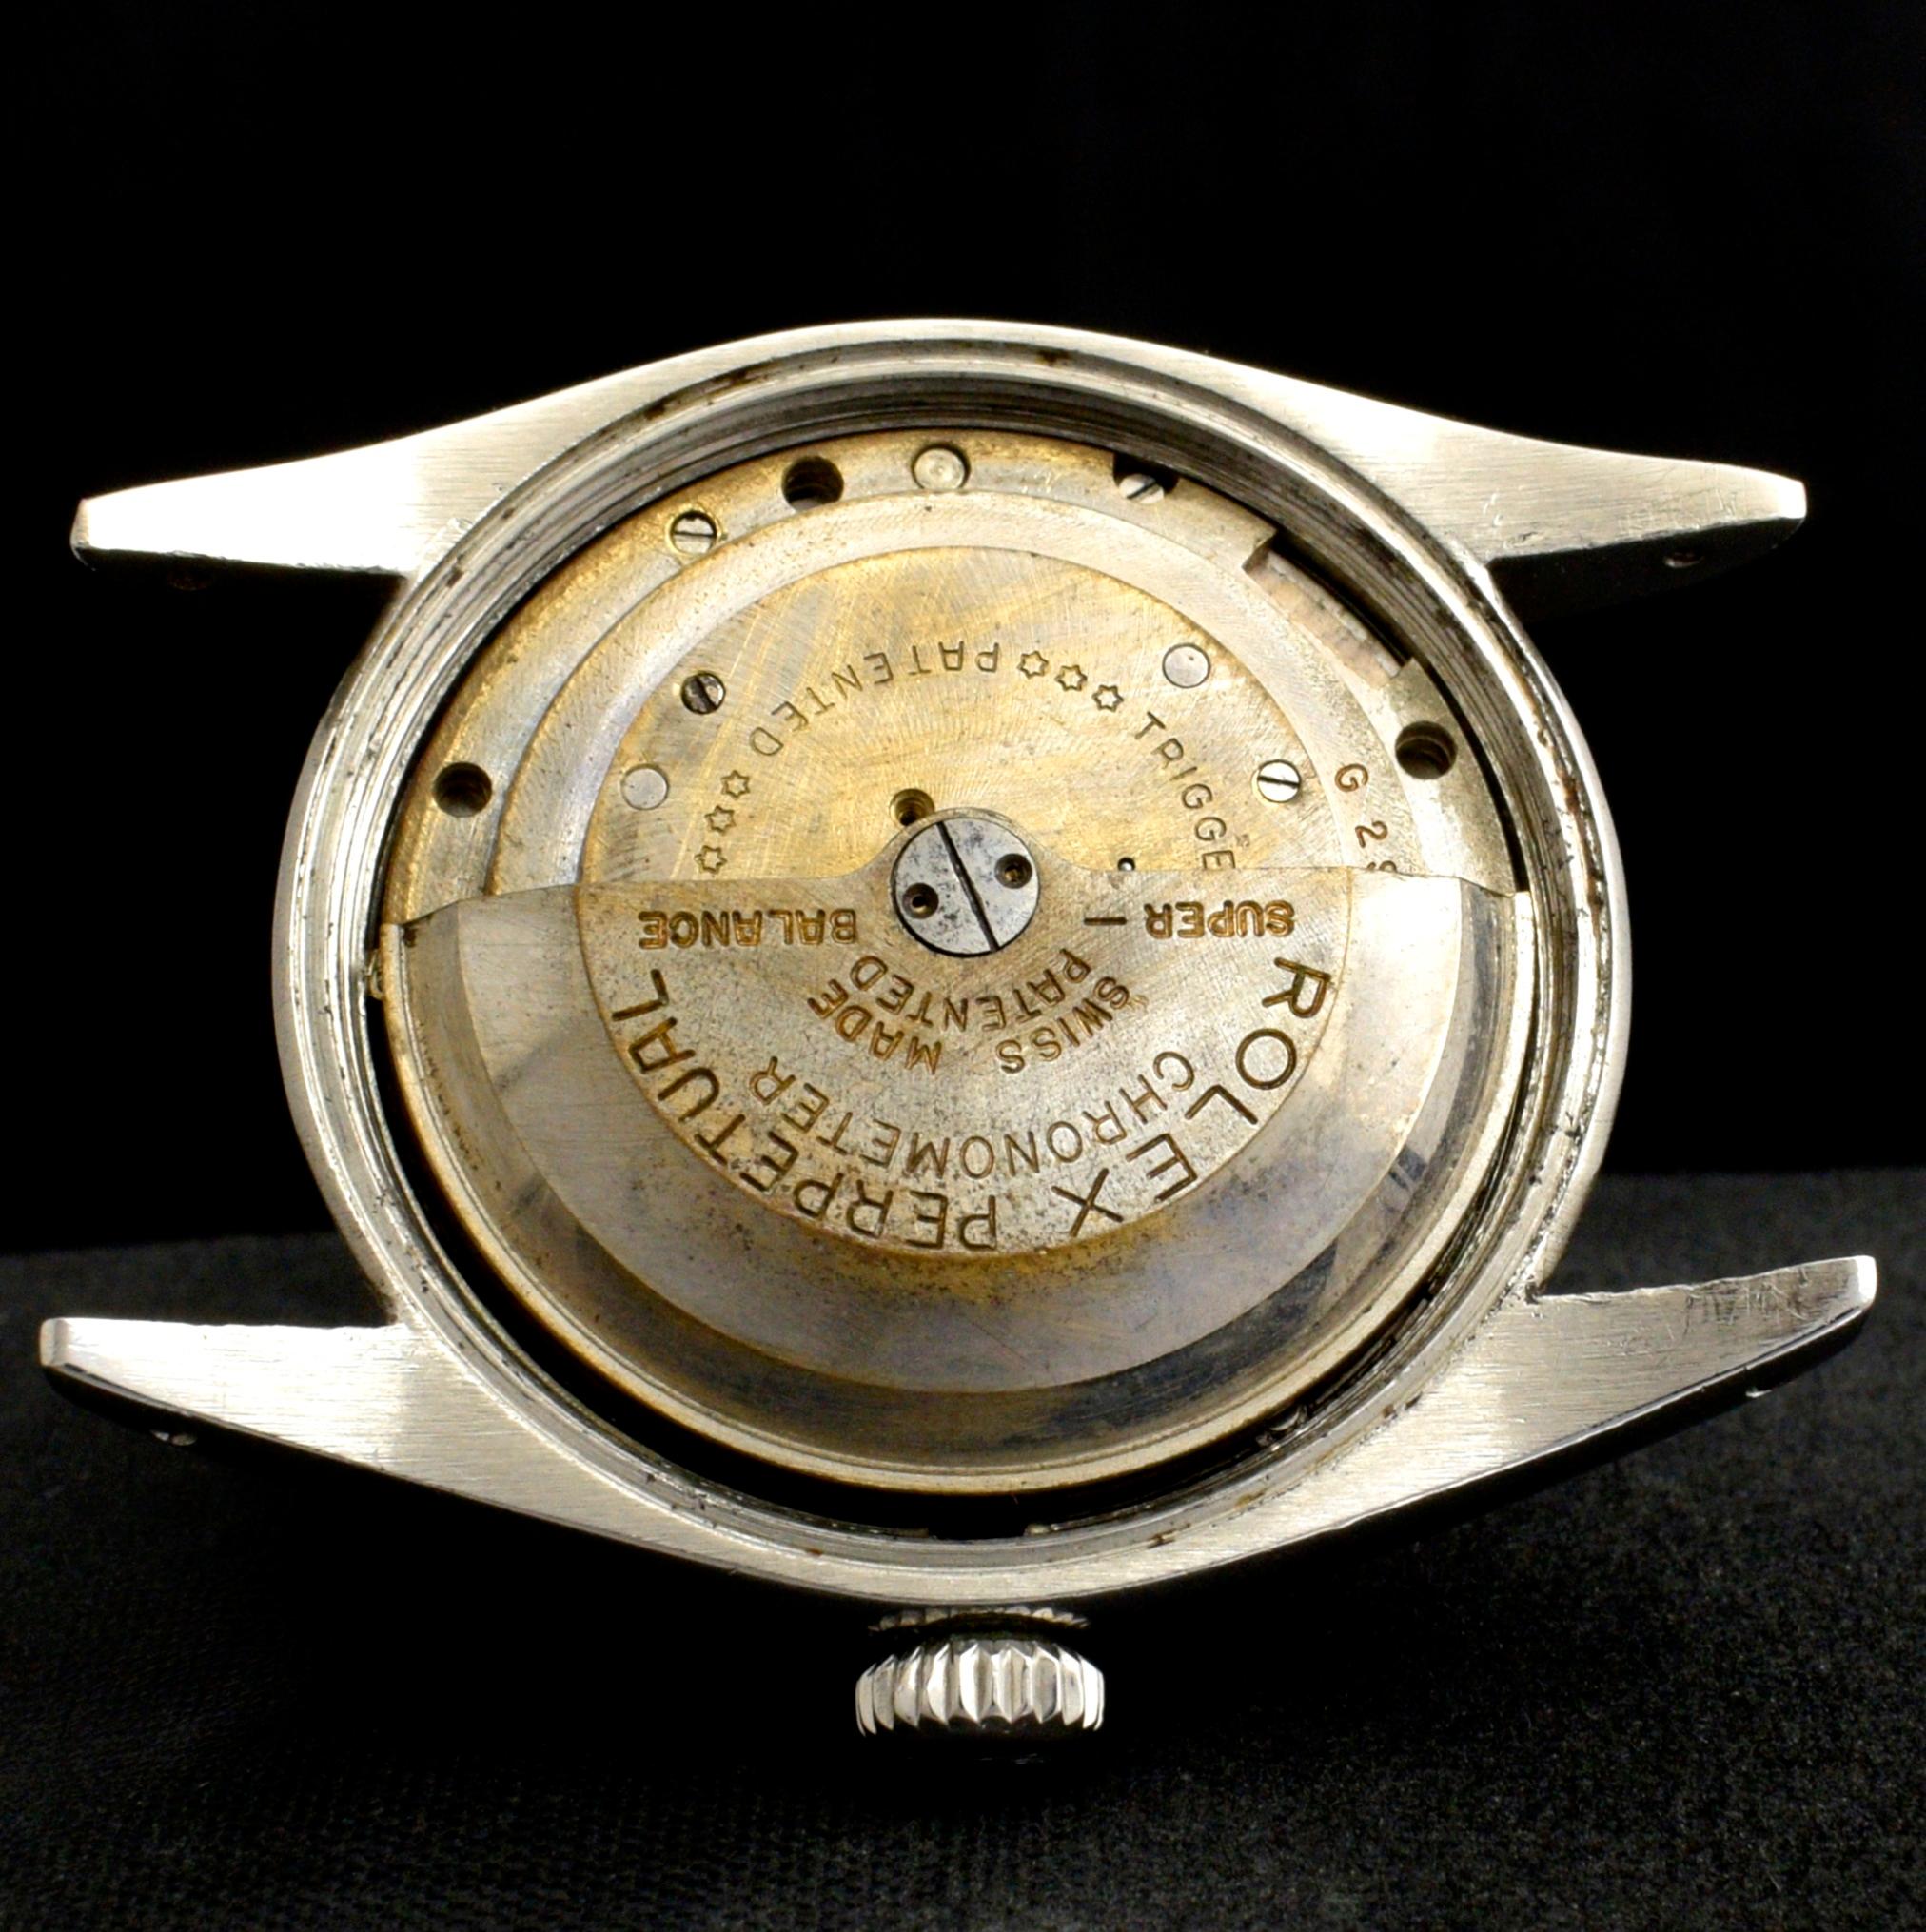 Rolex Oyster Perpetual Precision Big Bubbleback 6028 Steel Automatic Watch, 1952 For Sale 4